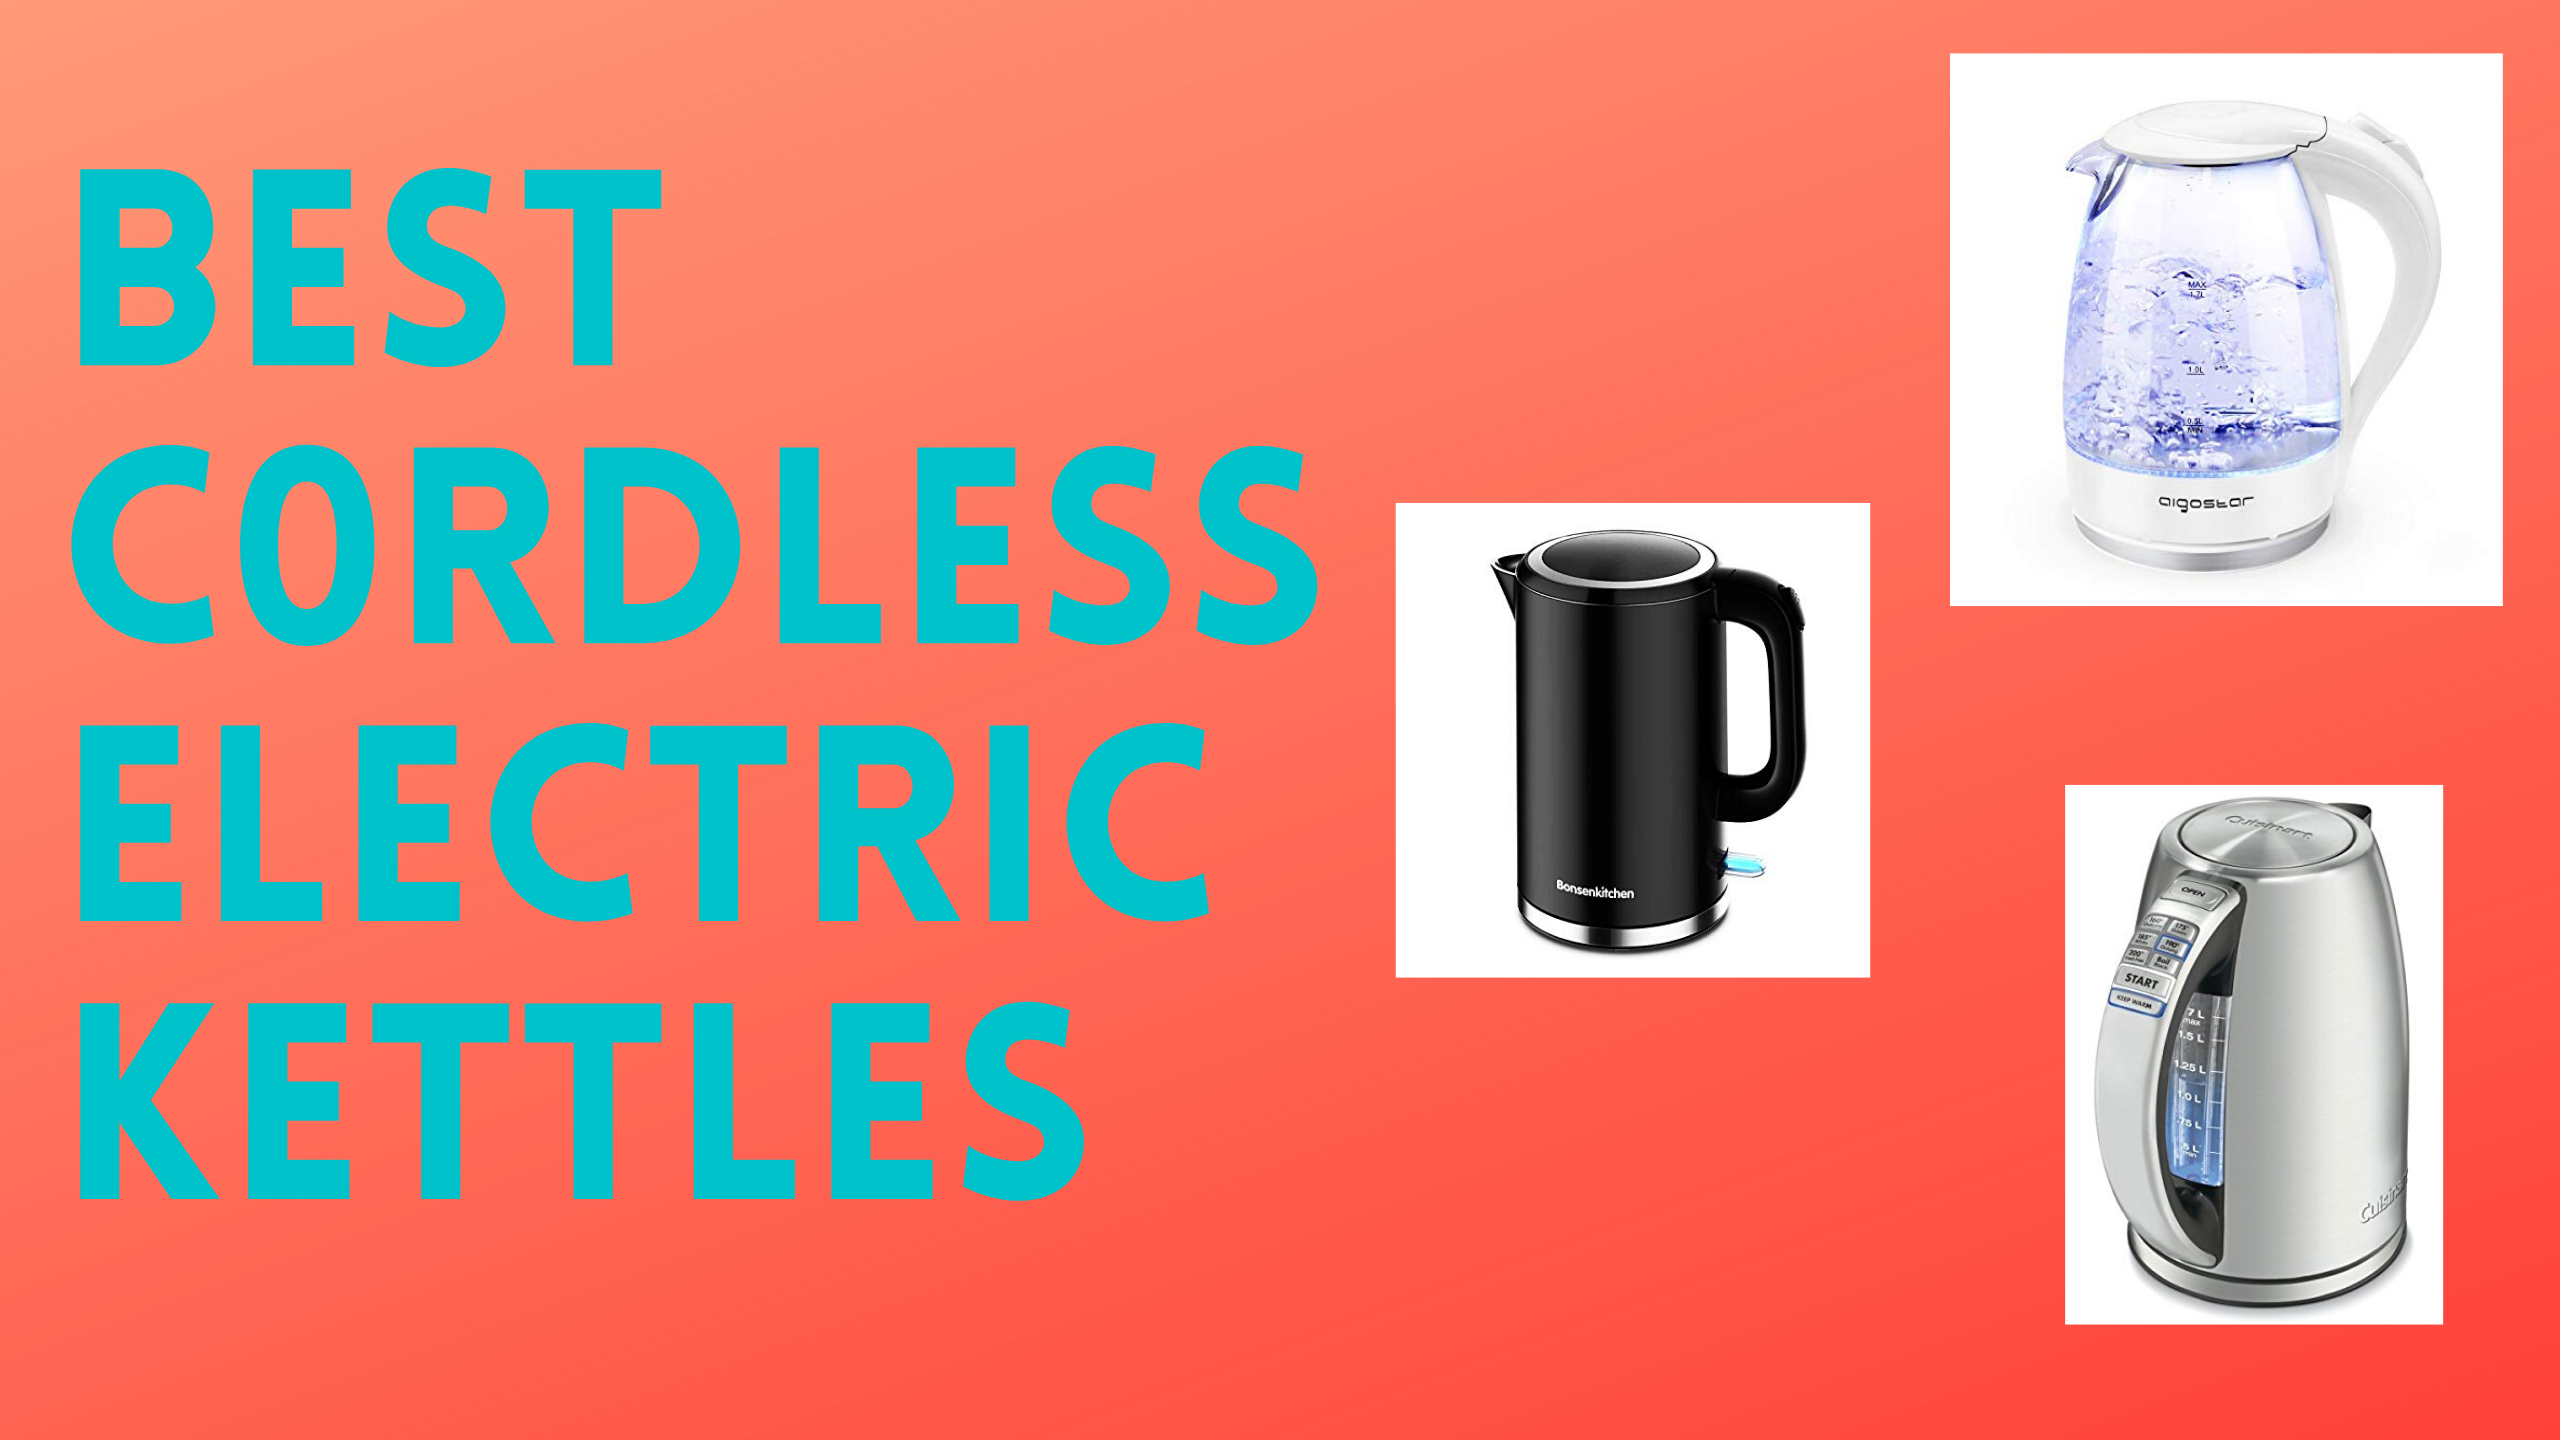 https://www.electrickettlesguide.com/wp-content/uploads/2020/04/best-cordless-electric-kettles.png